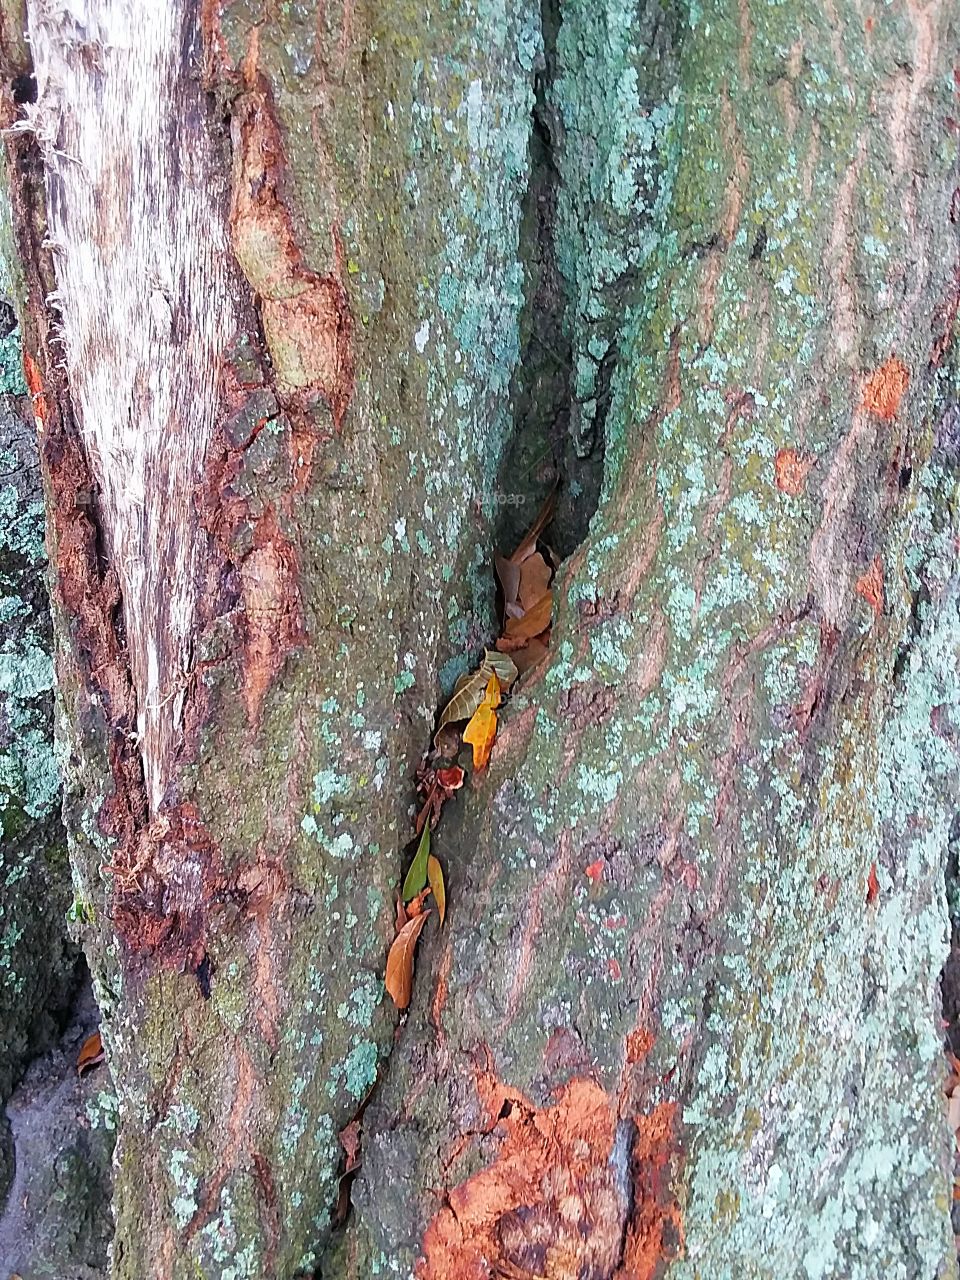 Slit in an old tree trunk